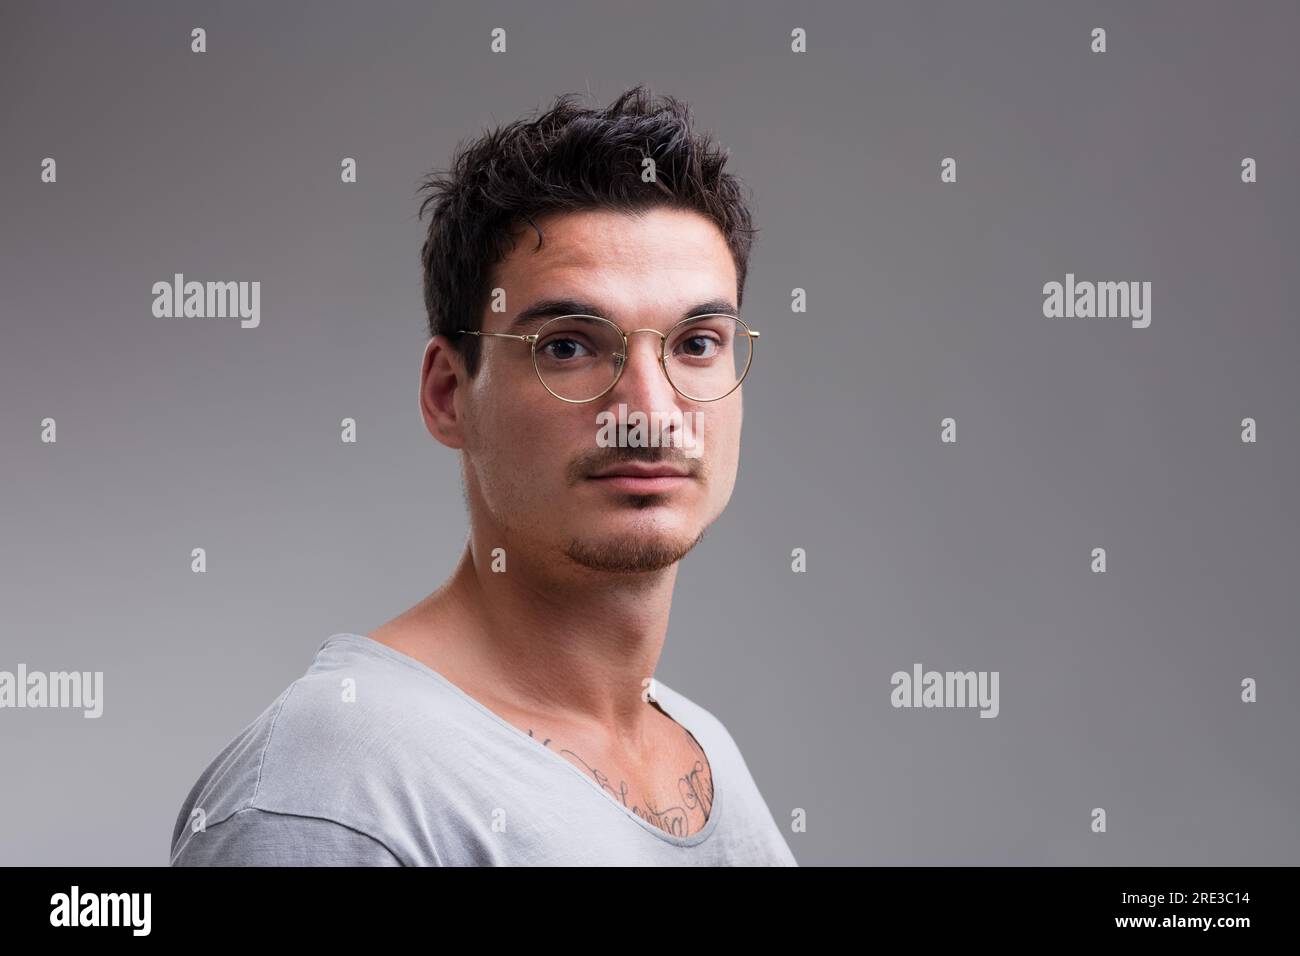 Handsome young man, short hair, glasses, revealing chest tattoo through short-sleeved shirt. His serious, uncertain gaze questions his future and iden Stock Photo